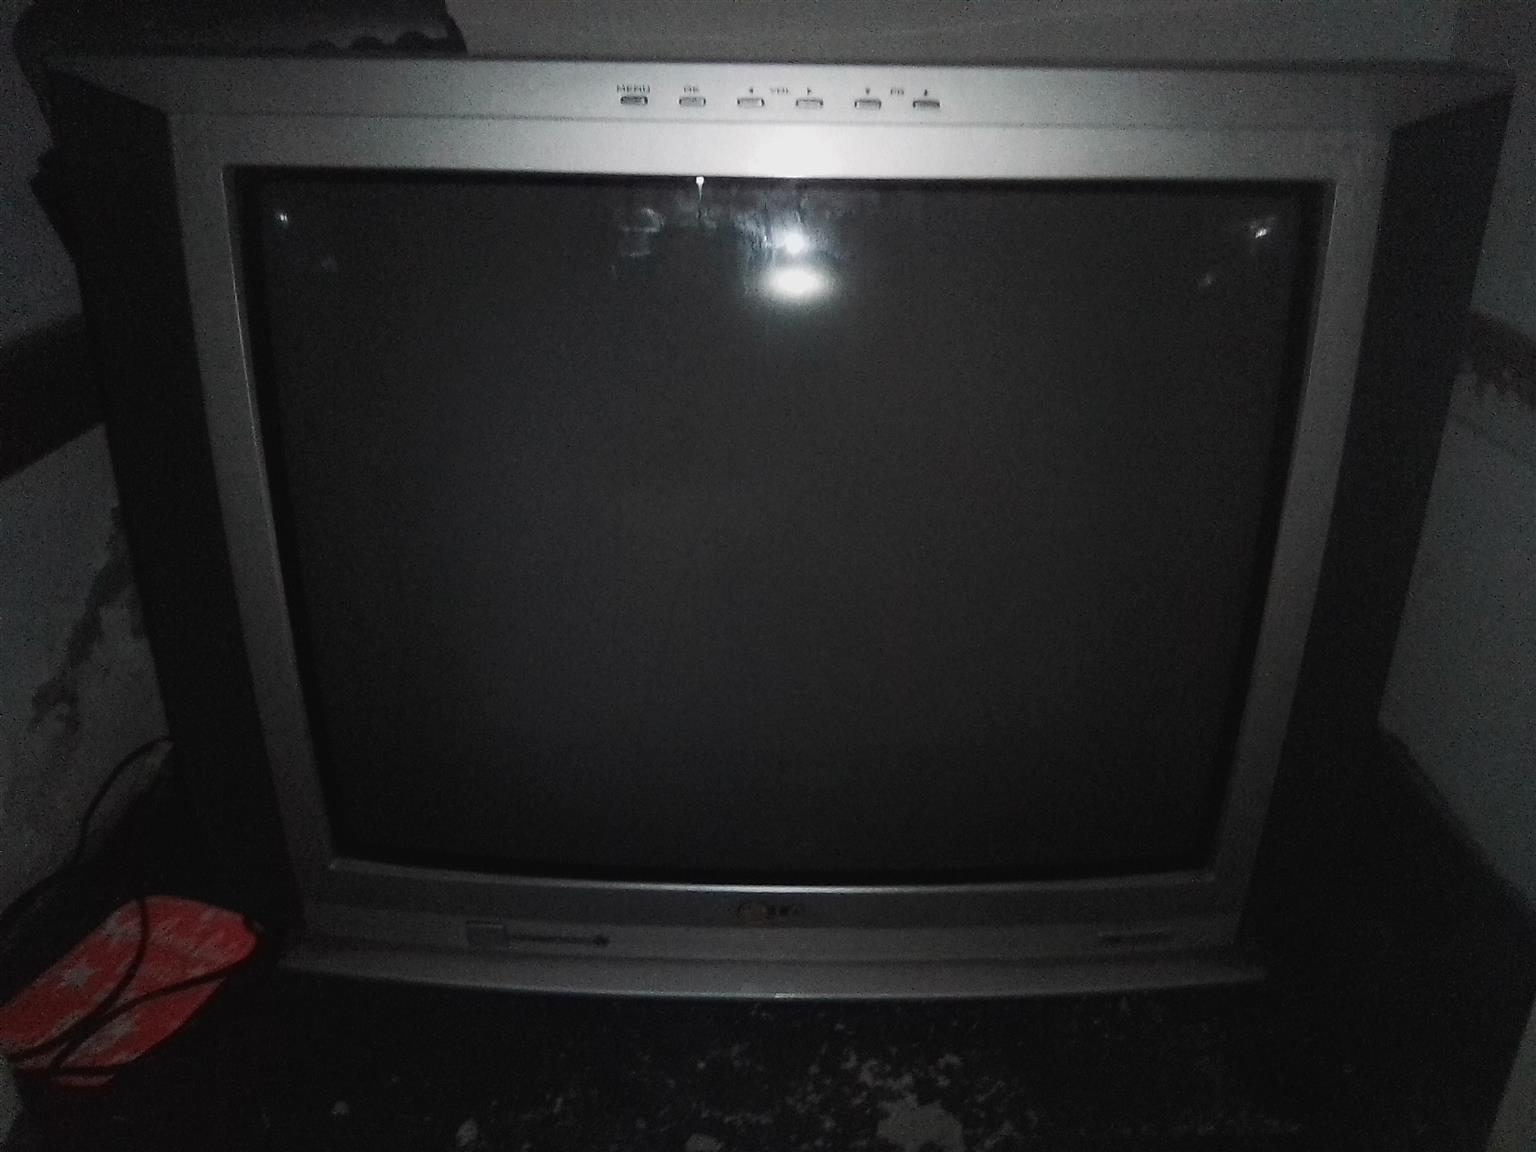  T.V . LG Comes with remote. Selling on behalf of someone else